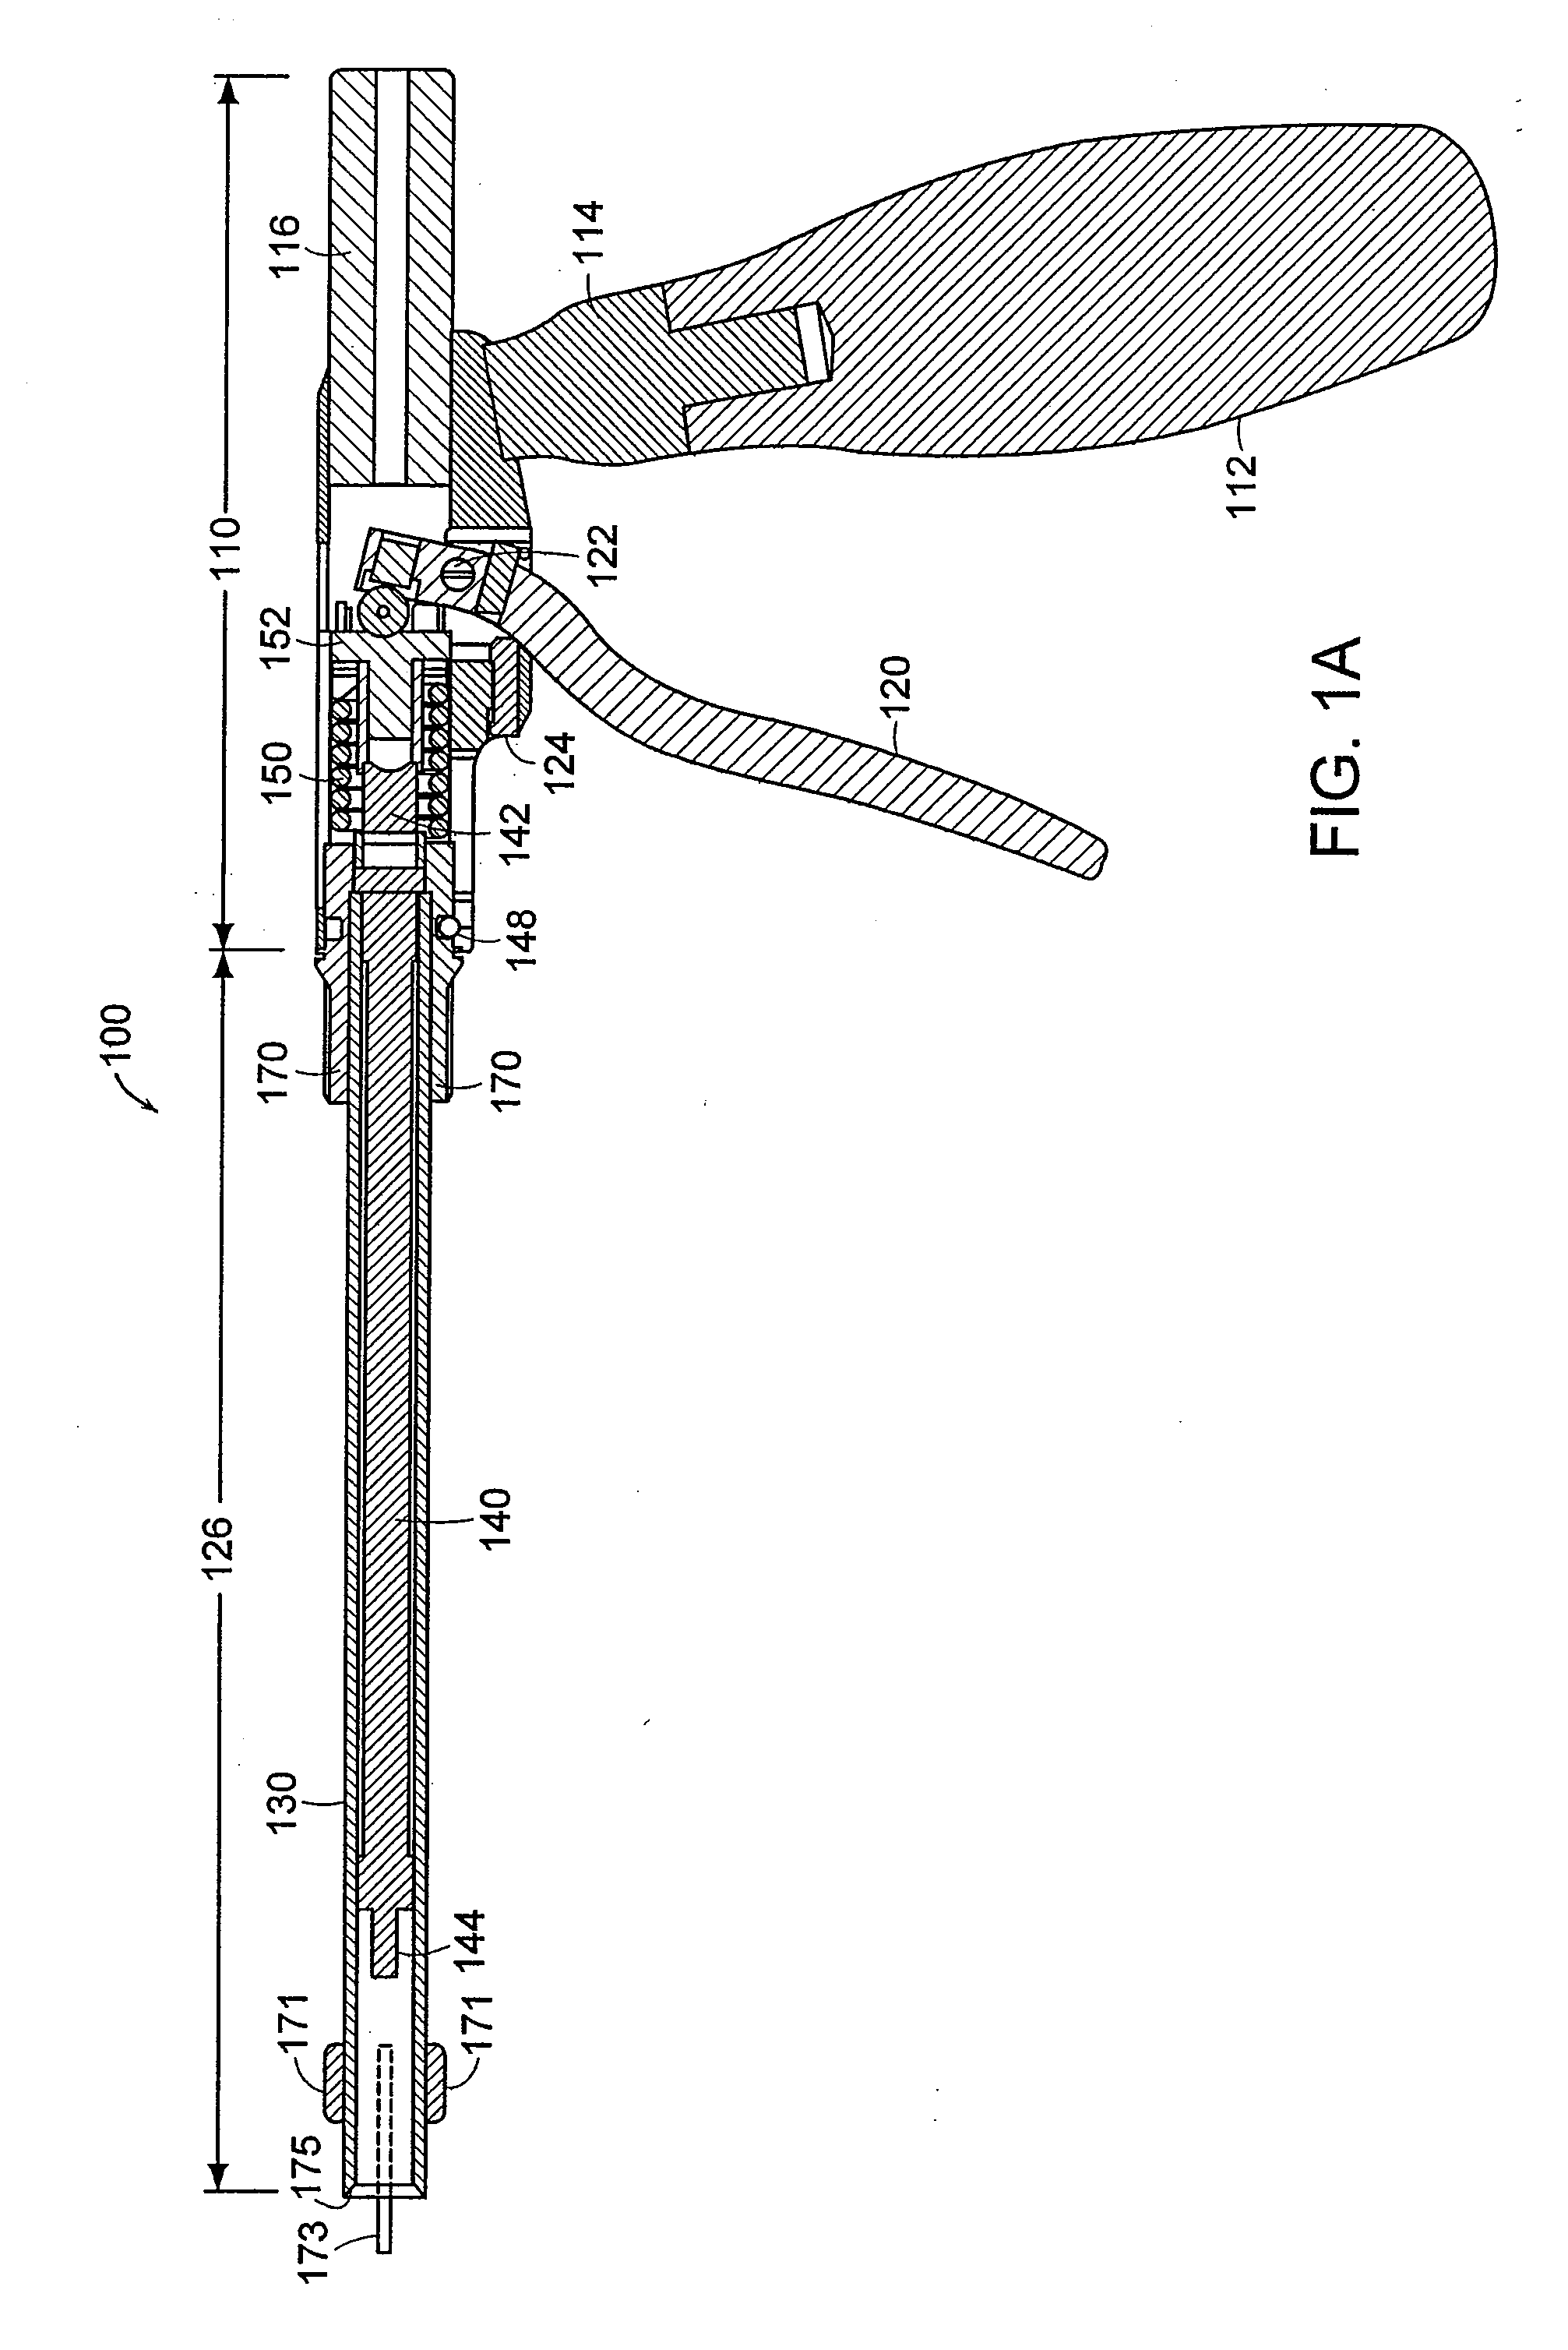 Inserter instrument and implant clip